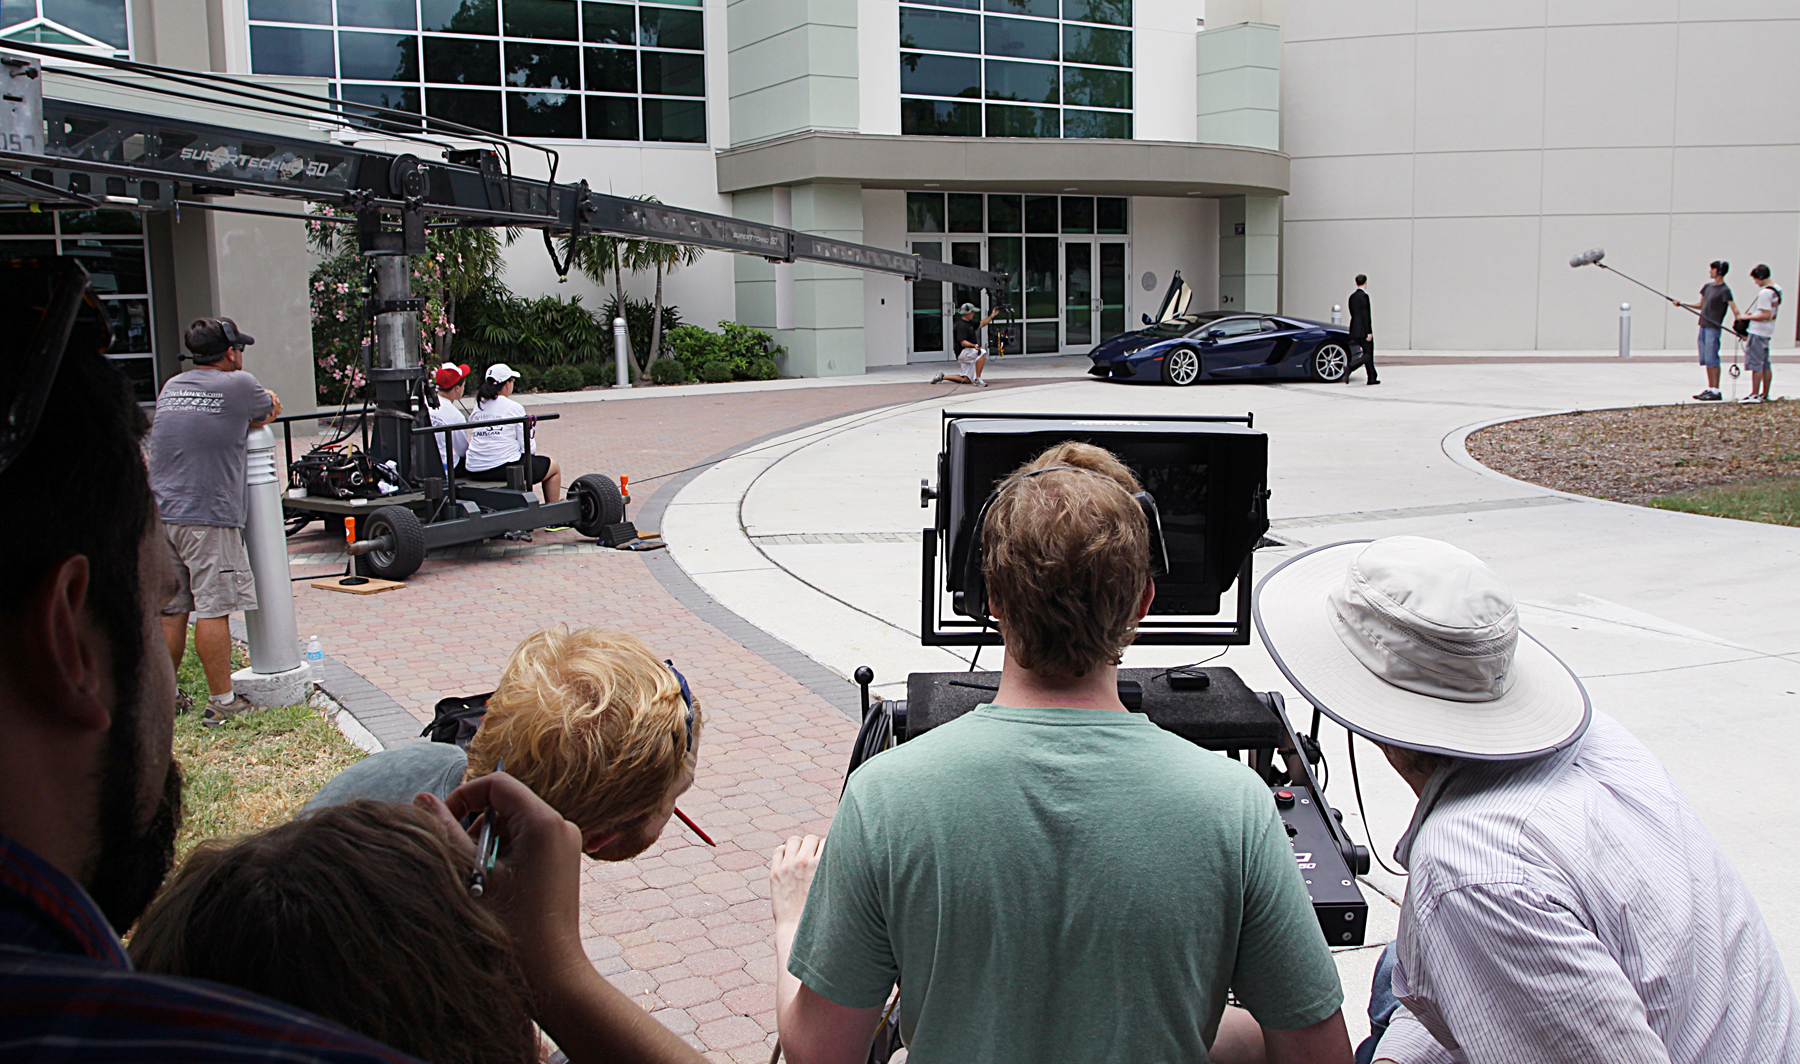 A complex shoot on 'The Lucky 6' using Technocrane donated by CineMoves and Lamborghini from Lamborghini of Sarasota Photo: Rich Schineller